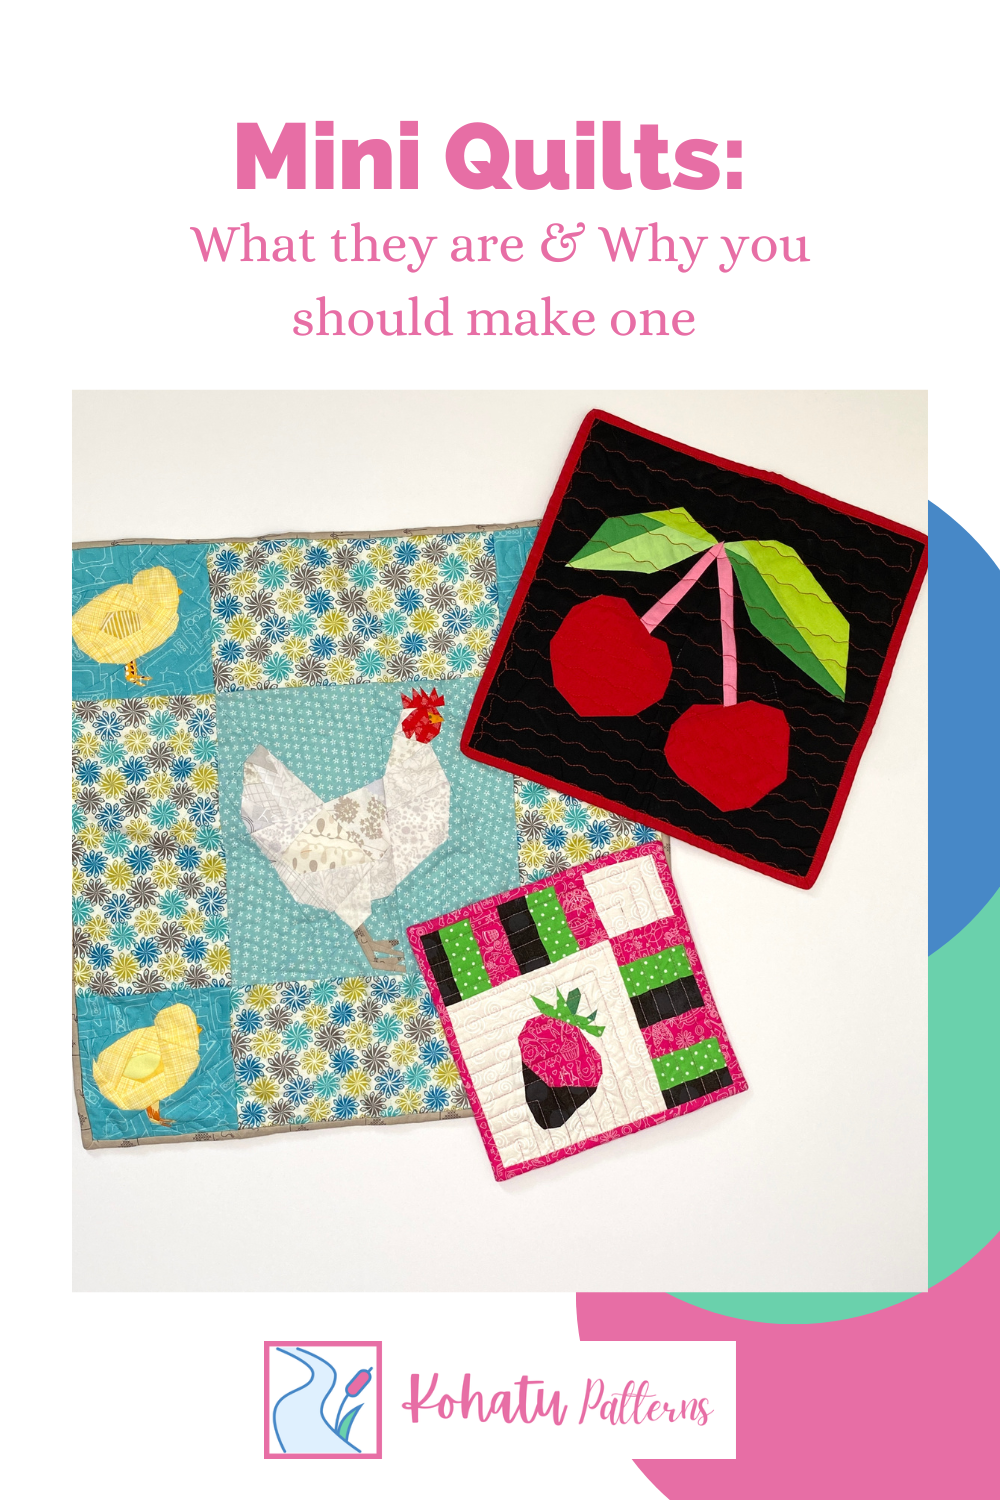 What is a Mini Quilt used for? Why should I make a Mini Quilt? These questions and more answered in this blog post about the joy of making a miniature quilt!